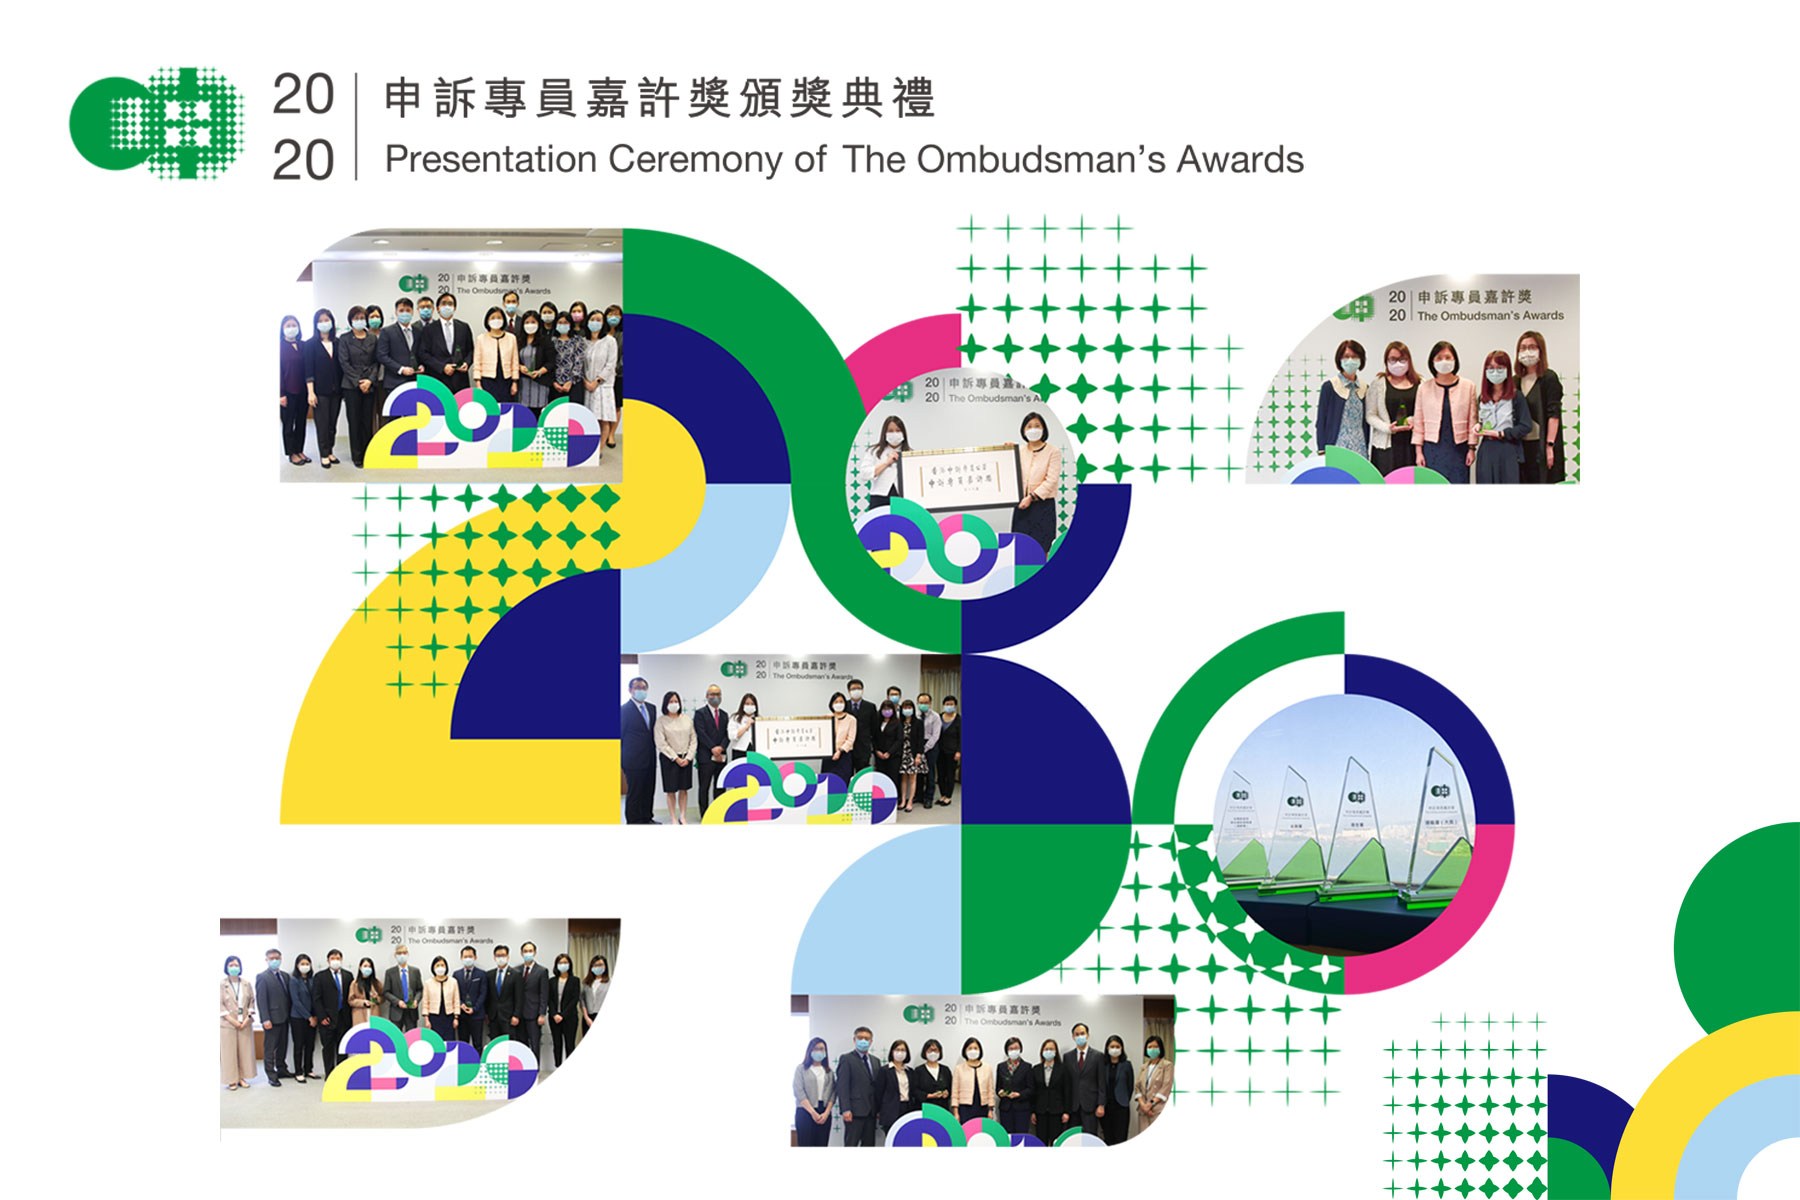 Promotional image of The Ombudsman’s Awards featuring the number 20 in green